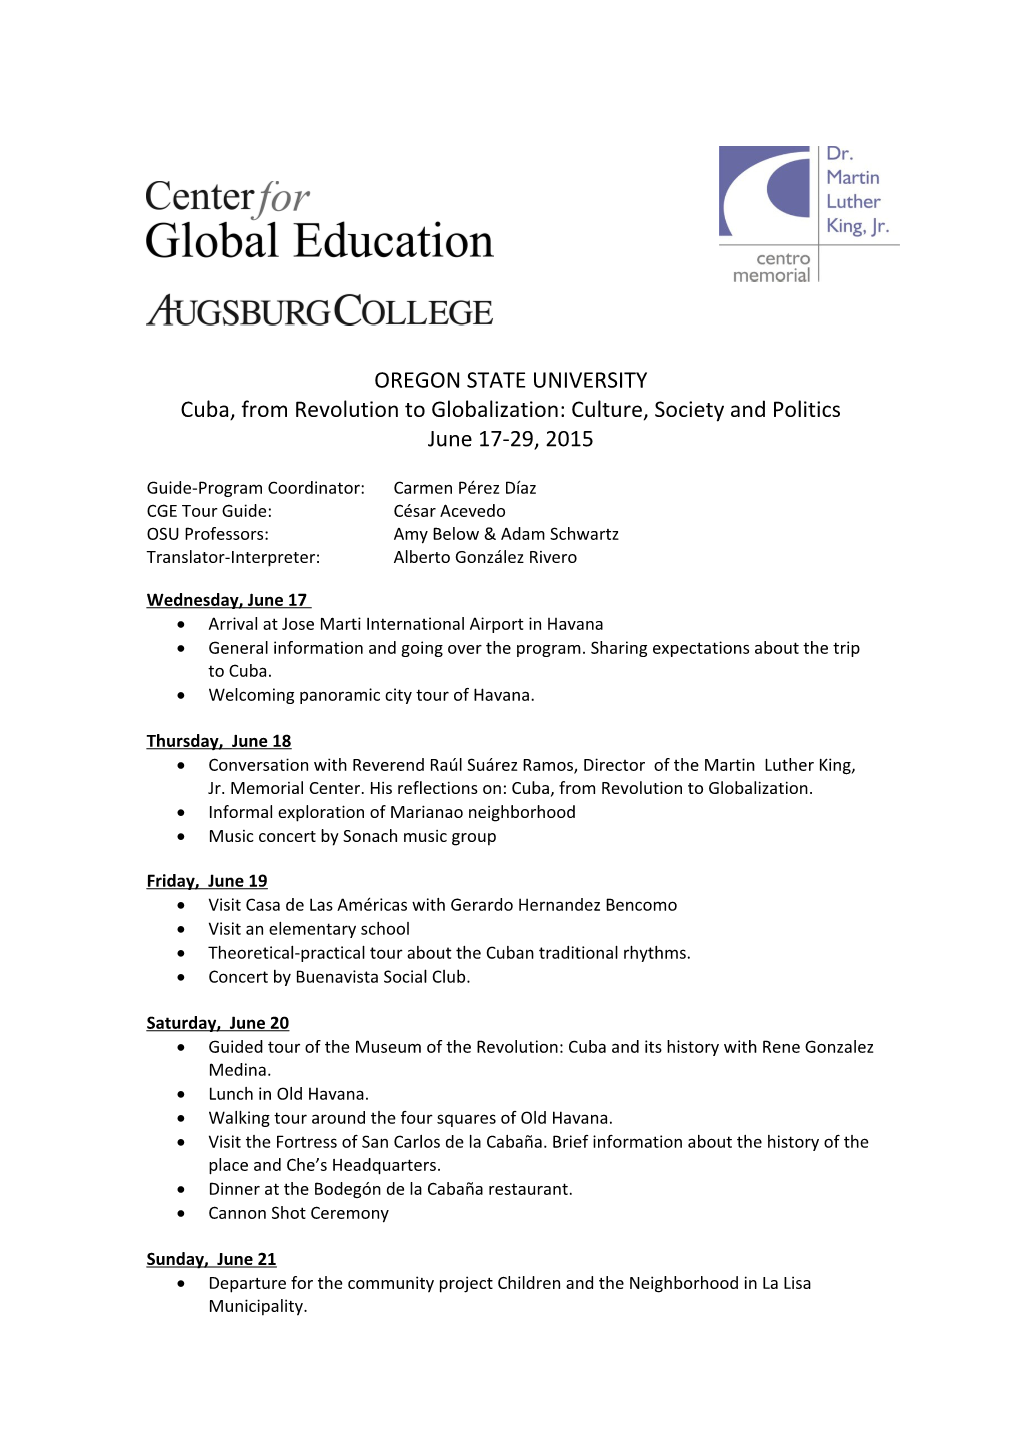 Cuba, from Revolution to Globalization: Culture, Society and Politics